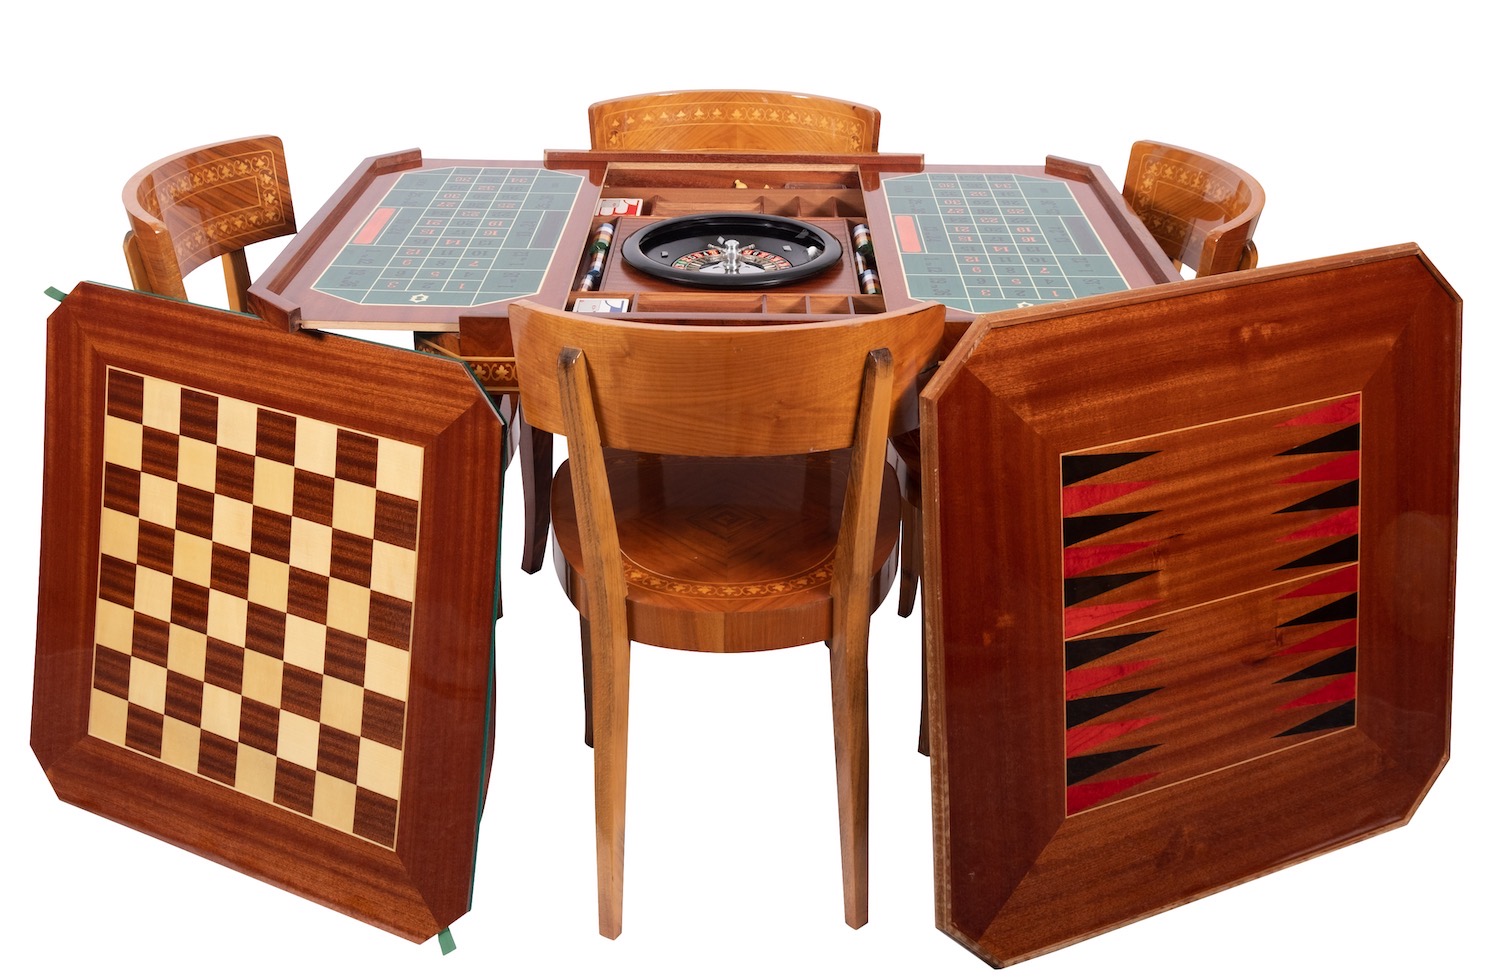 A Sorrentoware walnut and marquetry games table with four chairs en suite, - Image 2 of 3